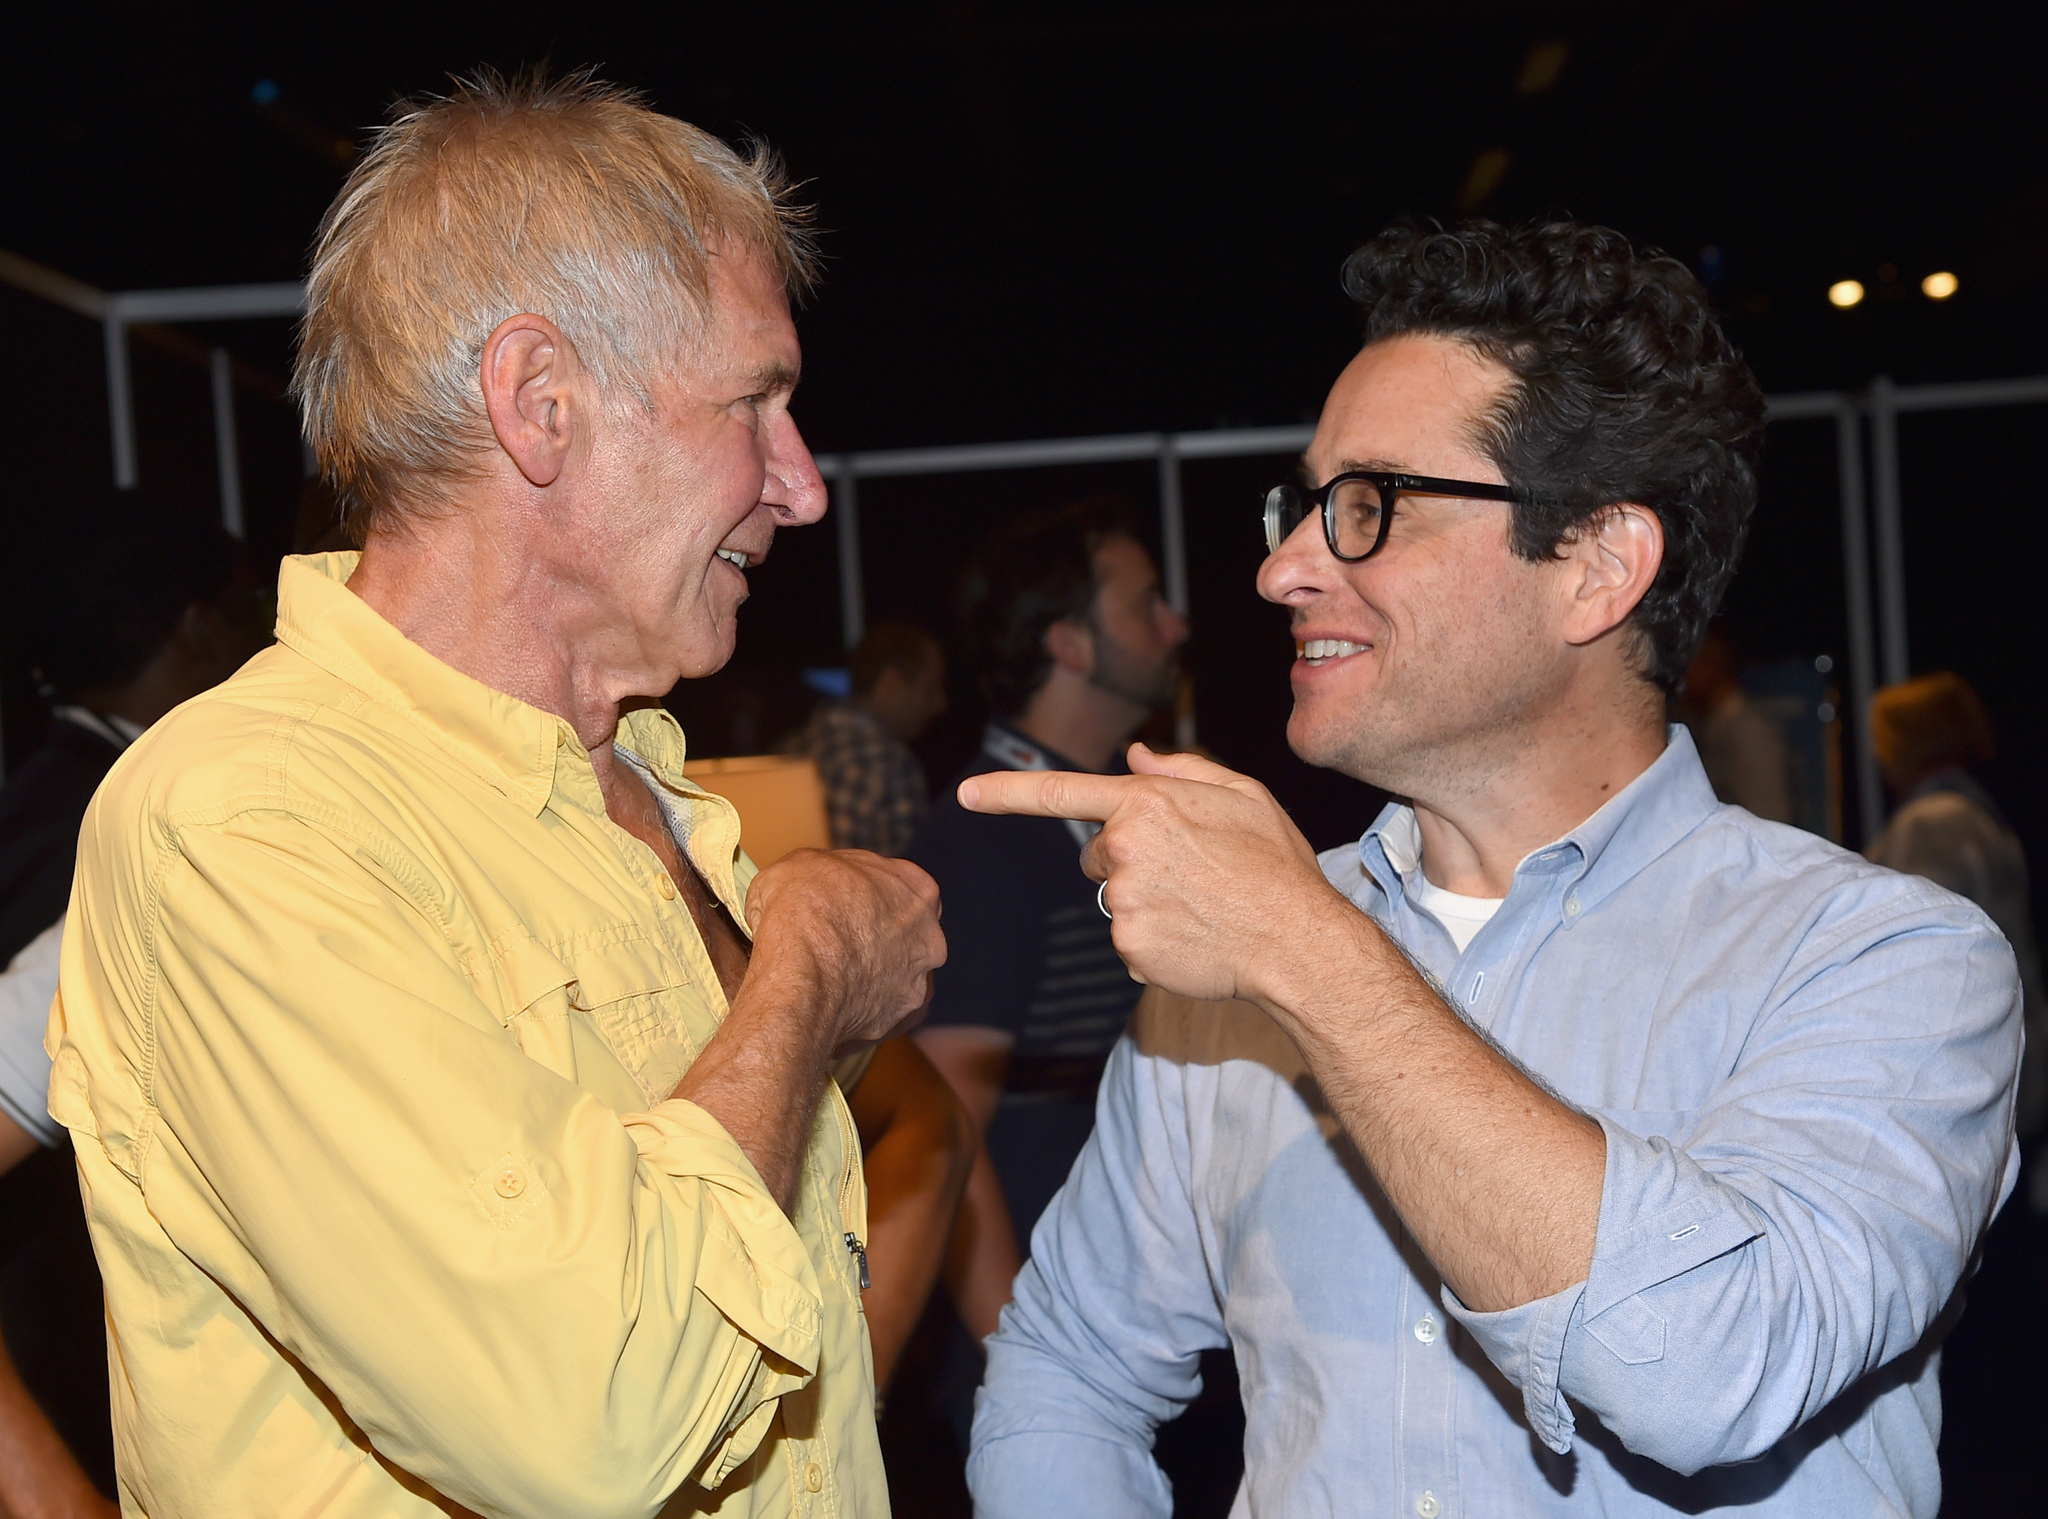 Harrison Ford and J.J. Abrams